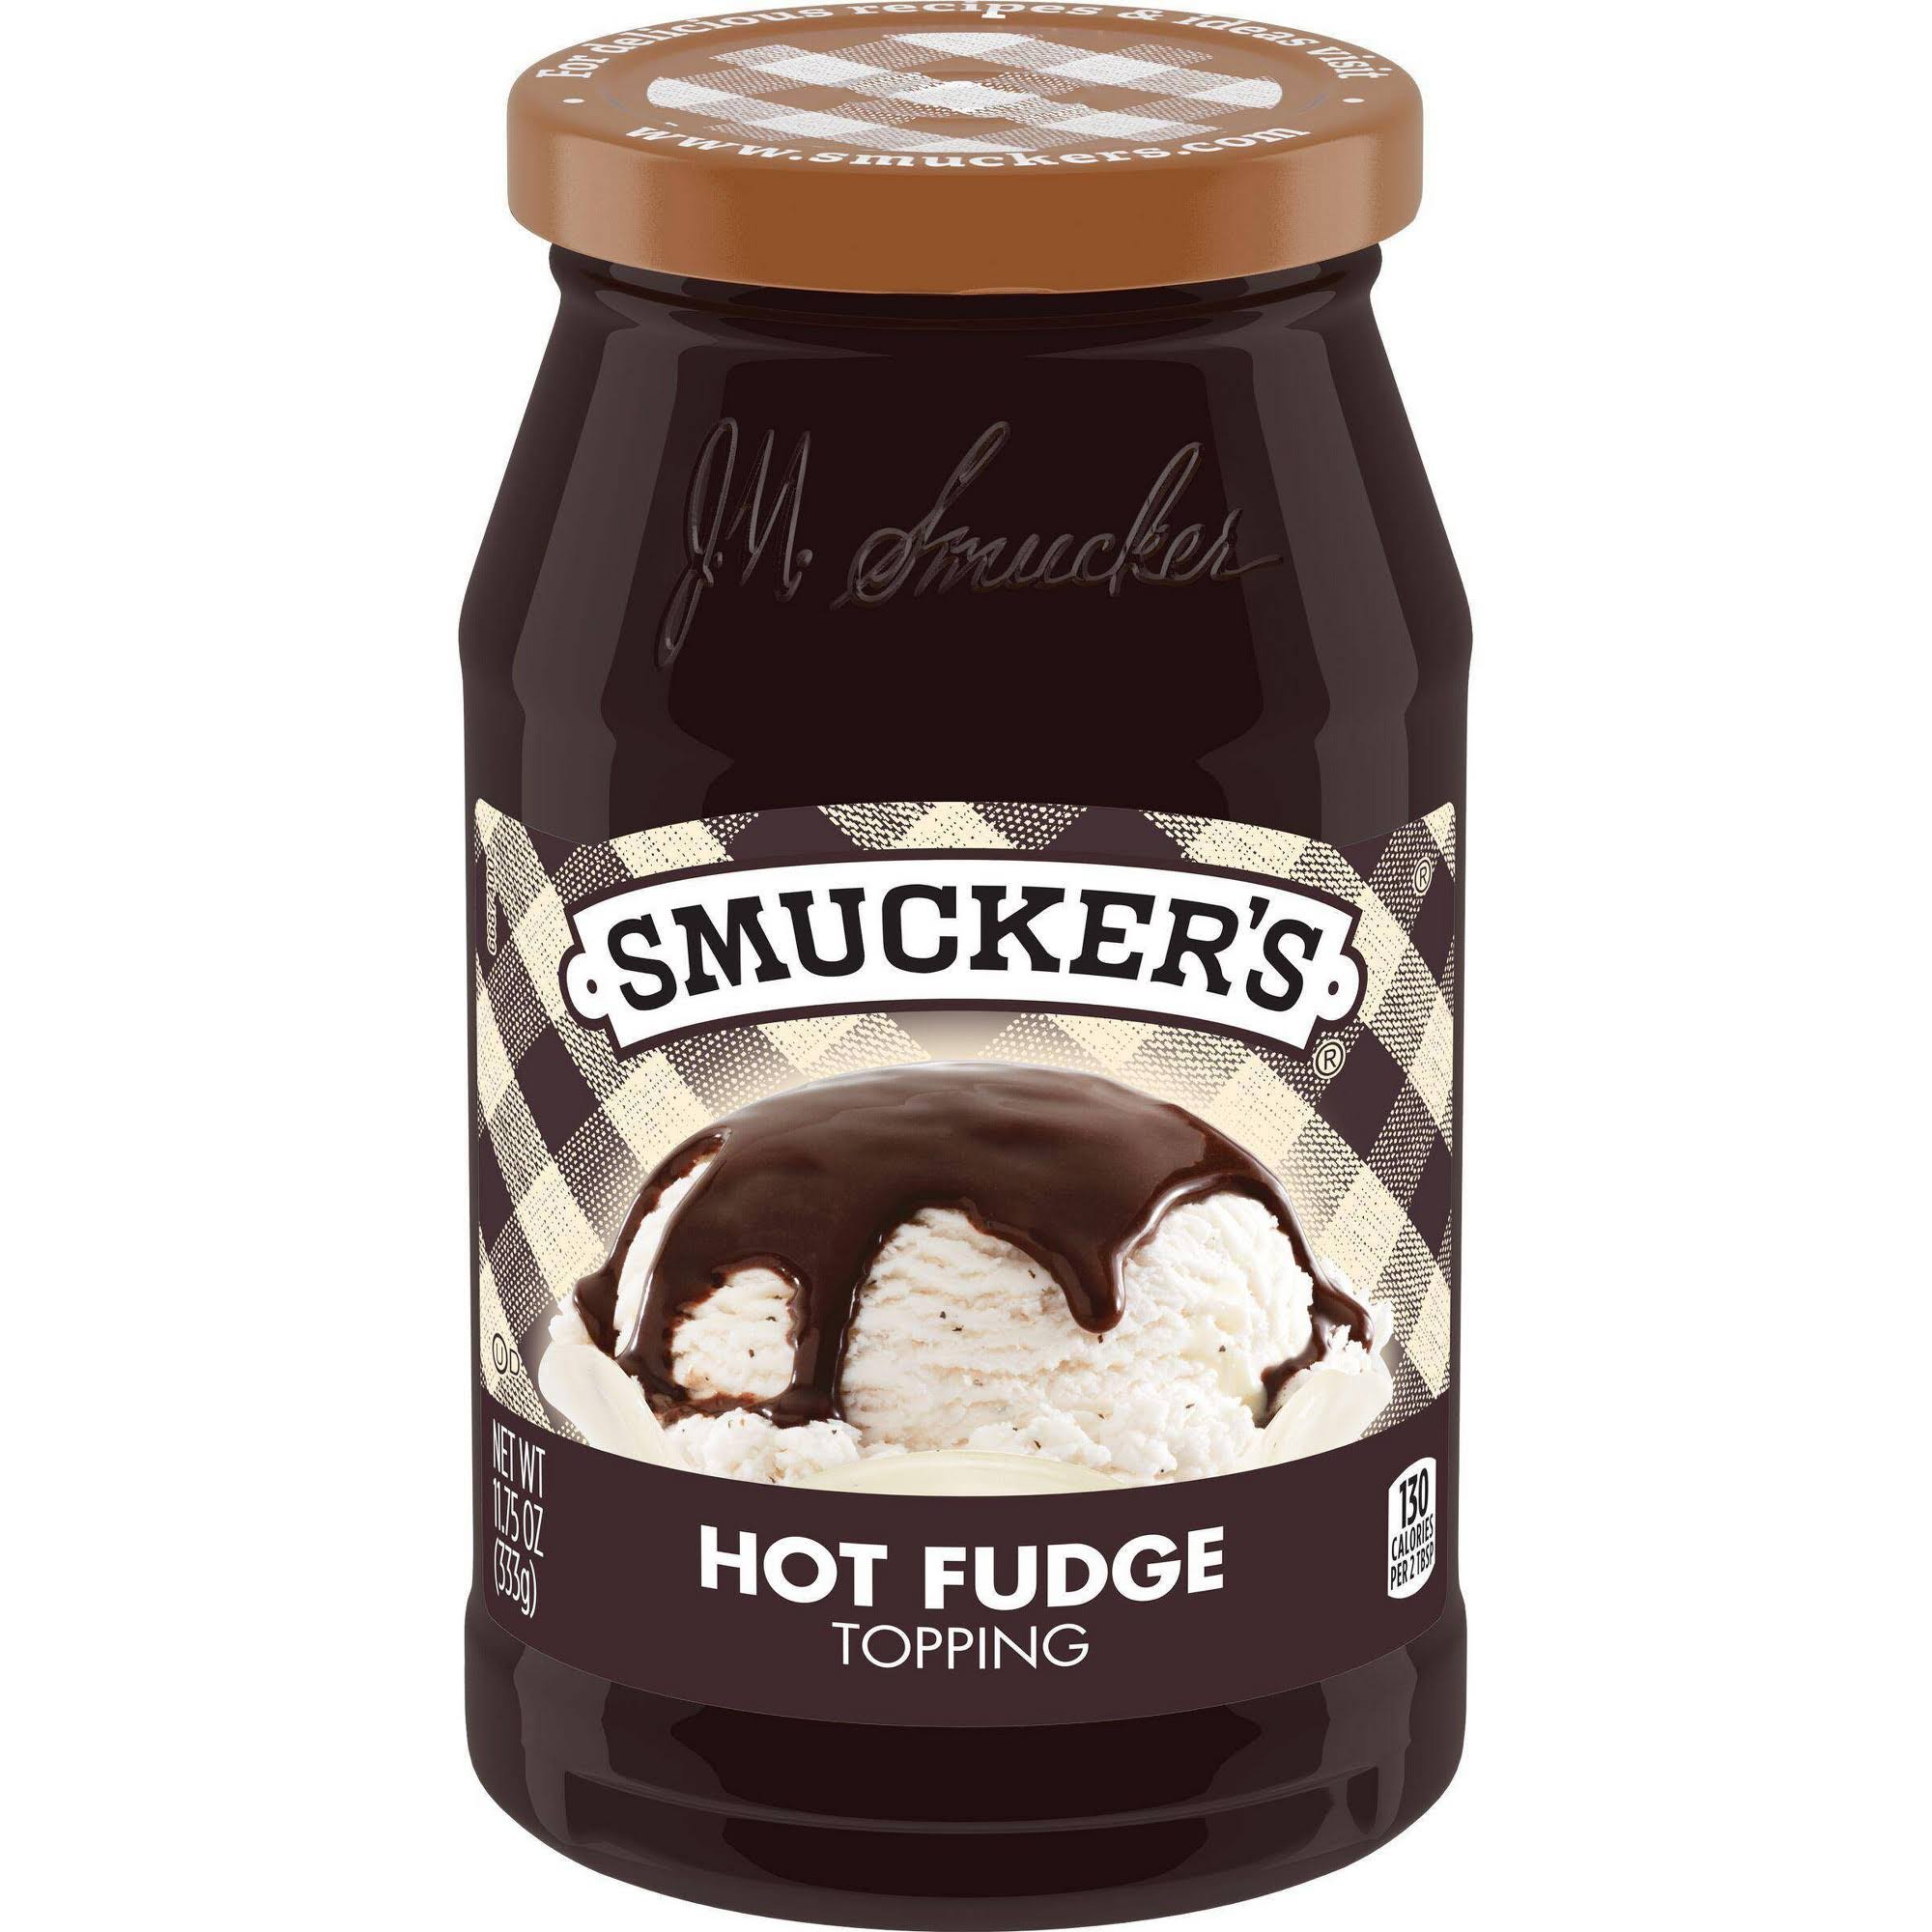 Smucker's Hot Fudge Topping - 11.75oz